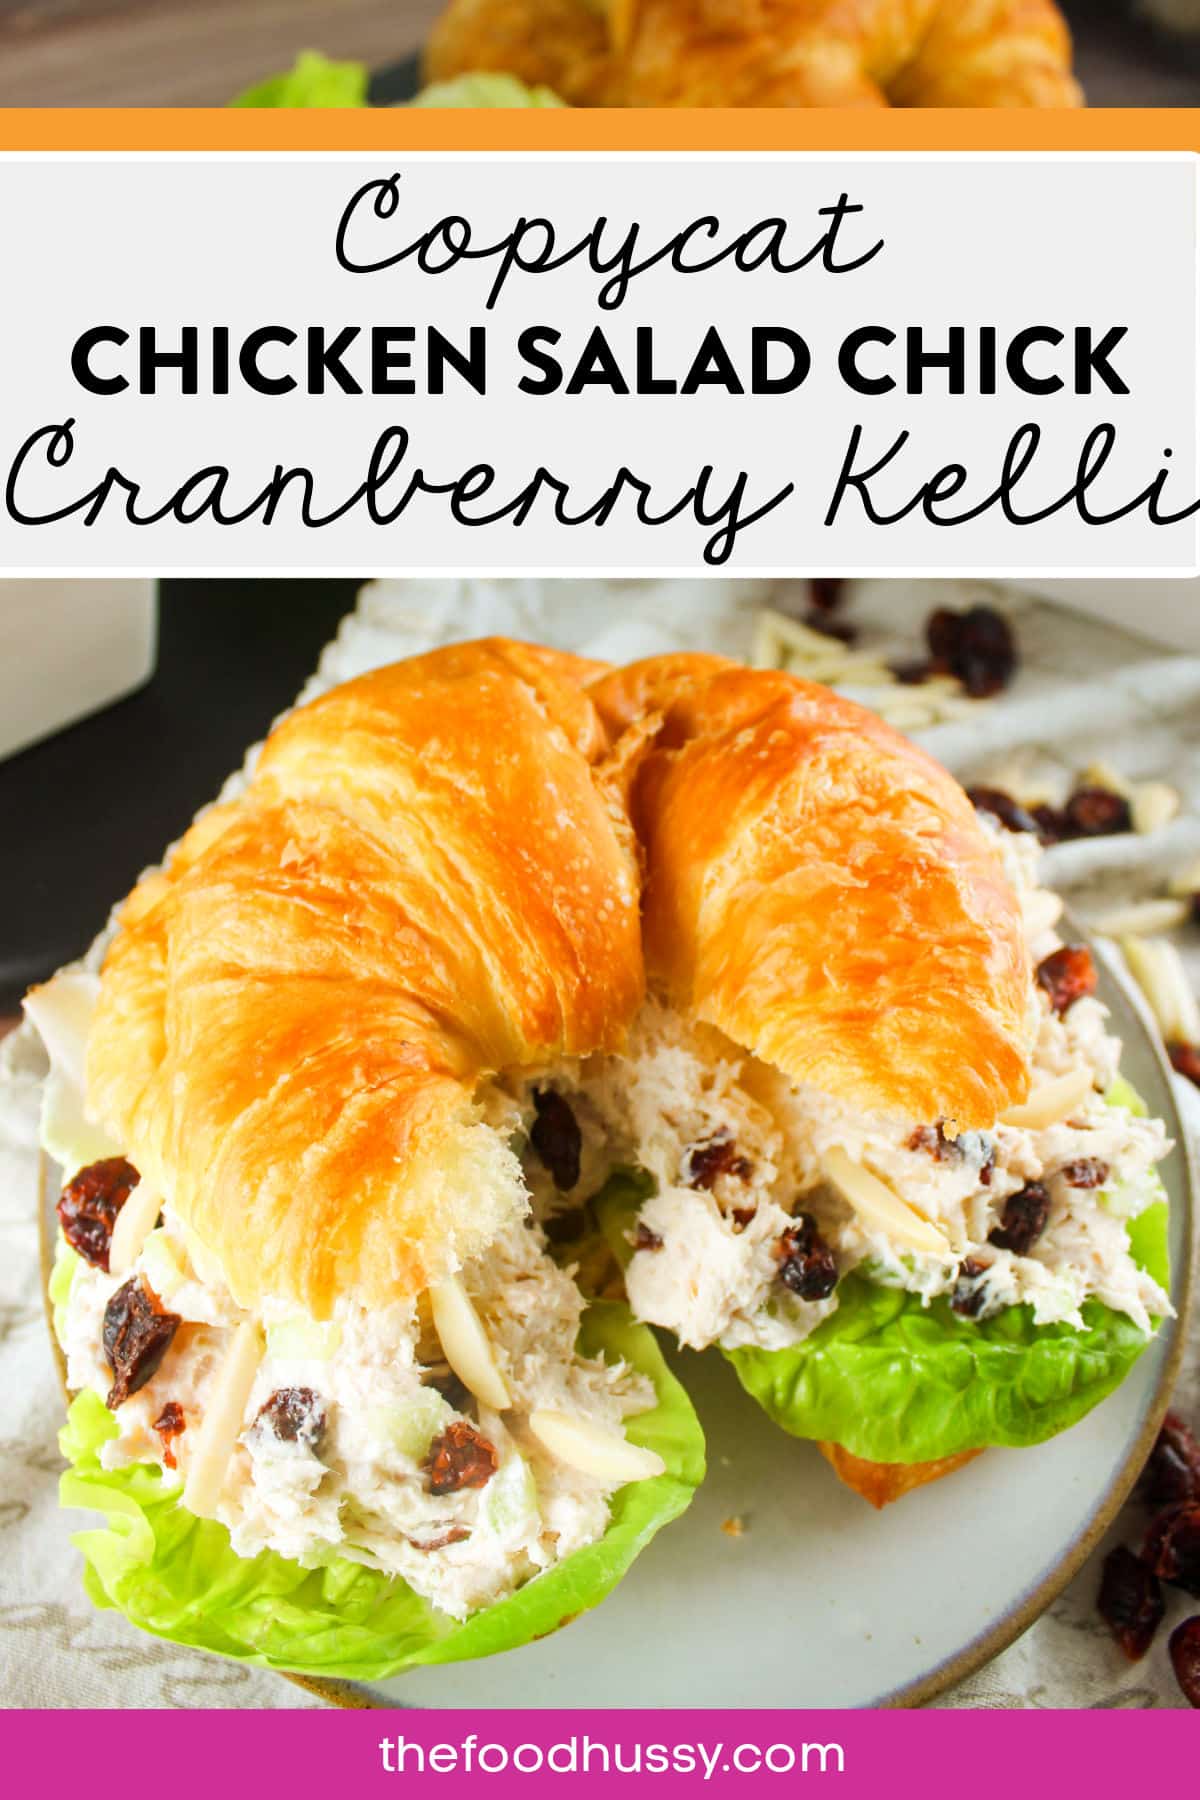 Chicken Salad Chick's Cranberry Kelli is a fun and fruity version of their chicken salad! Tangy cranberries and crunchy almonds add to the delicious flavor of their original recipe.  via @foodhussy